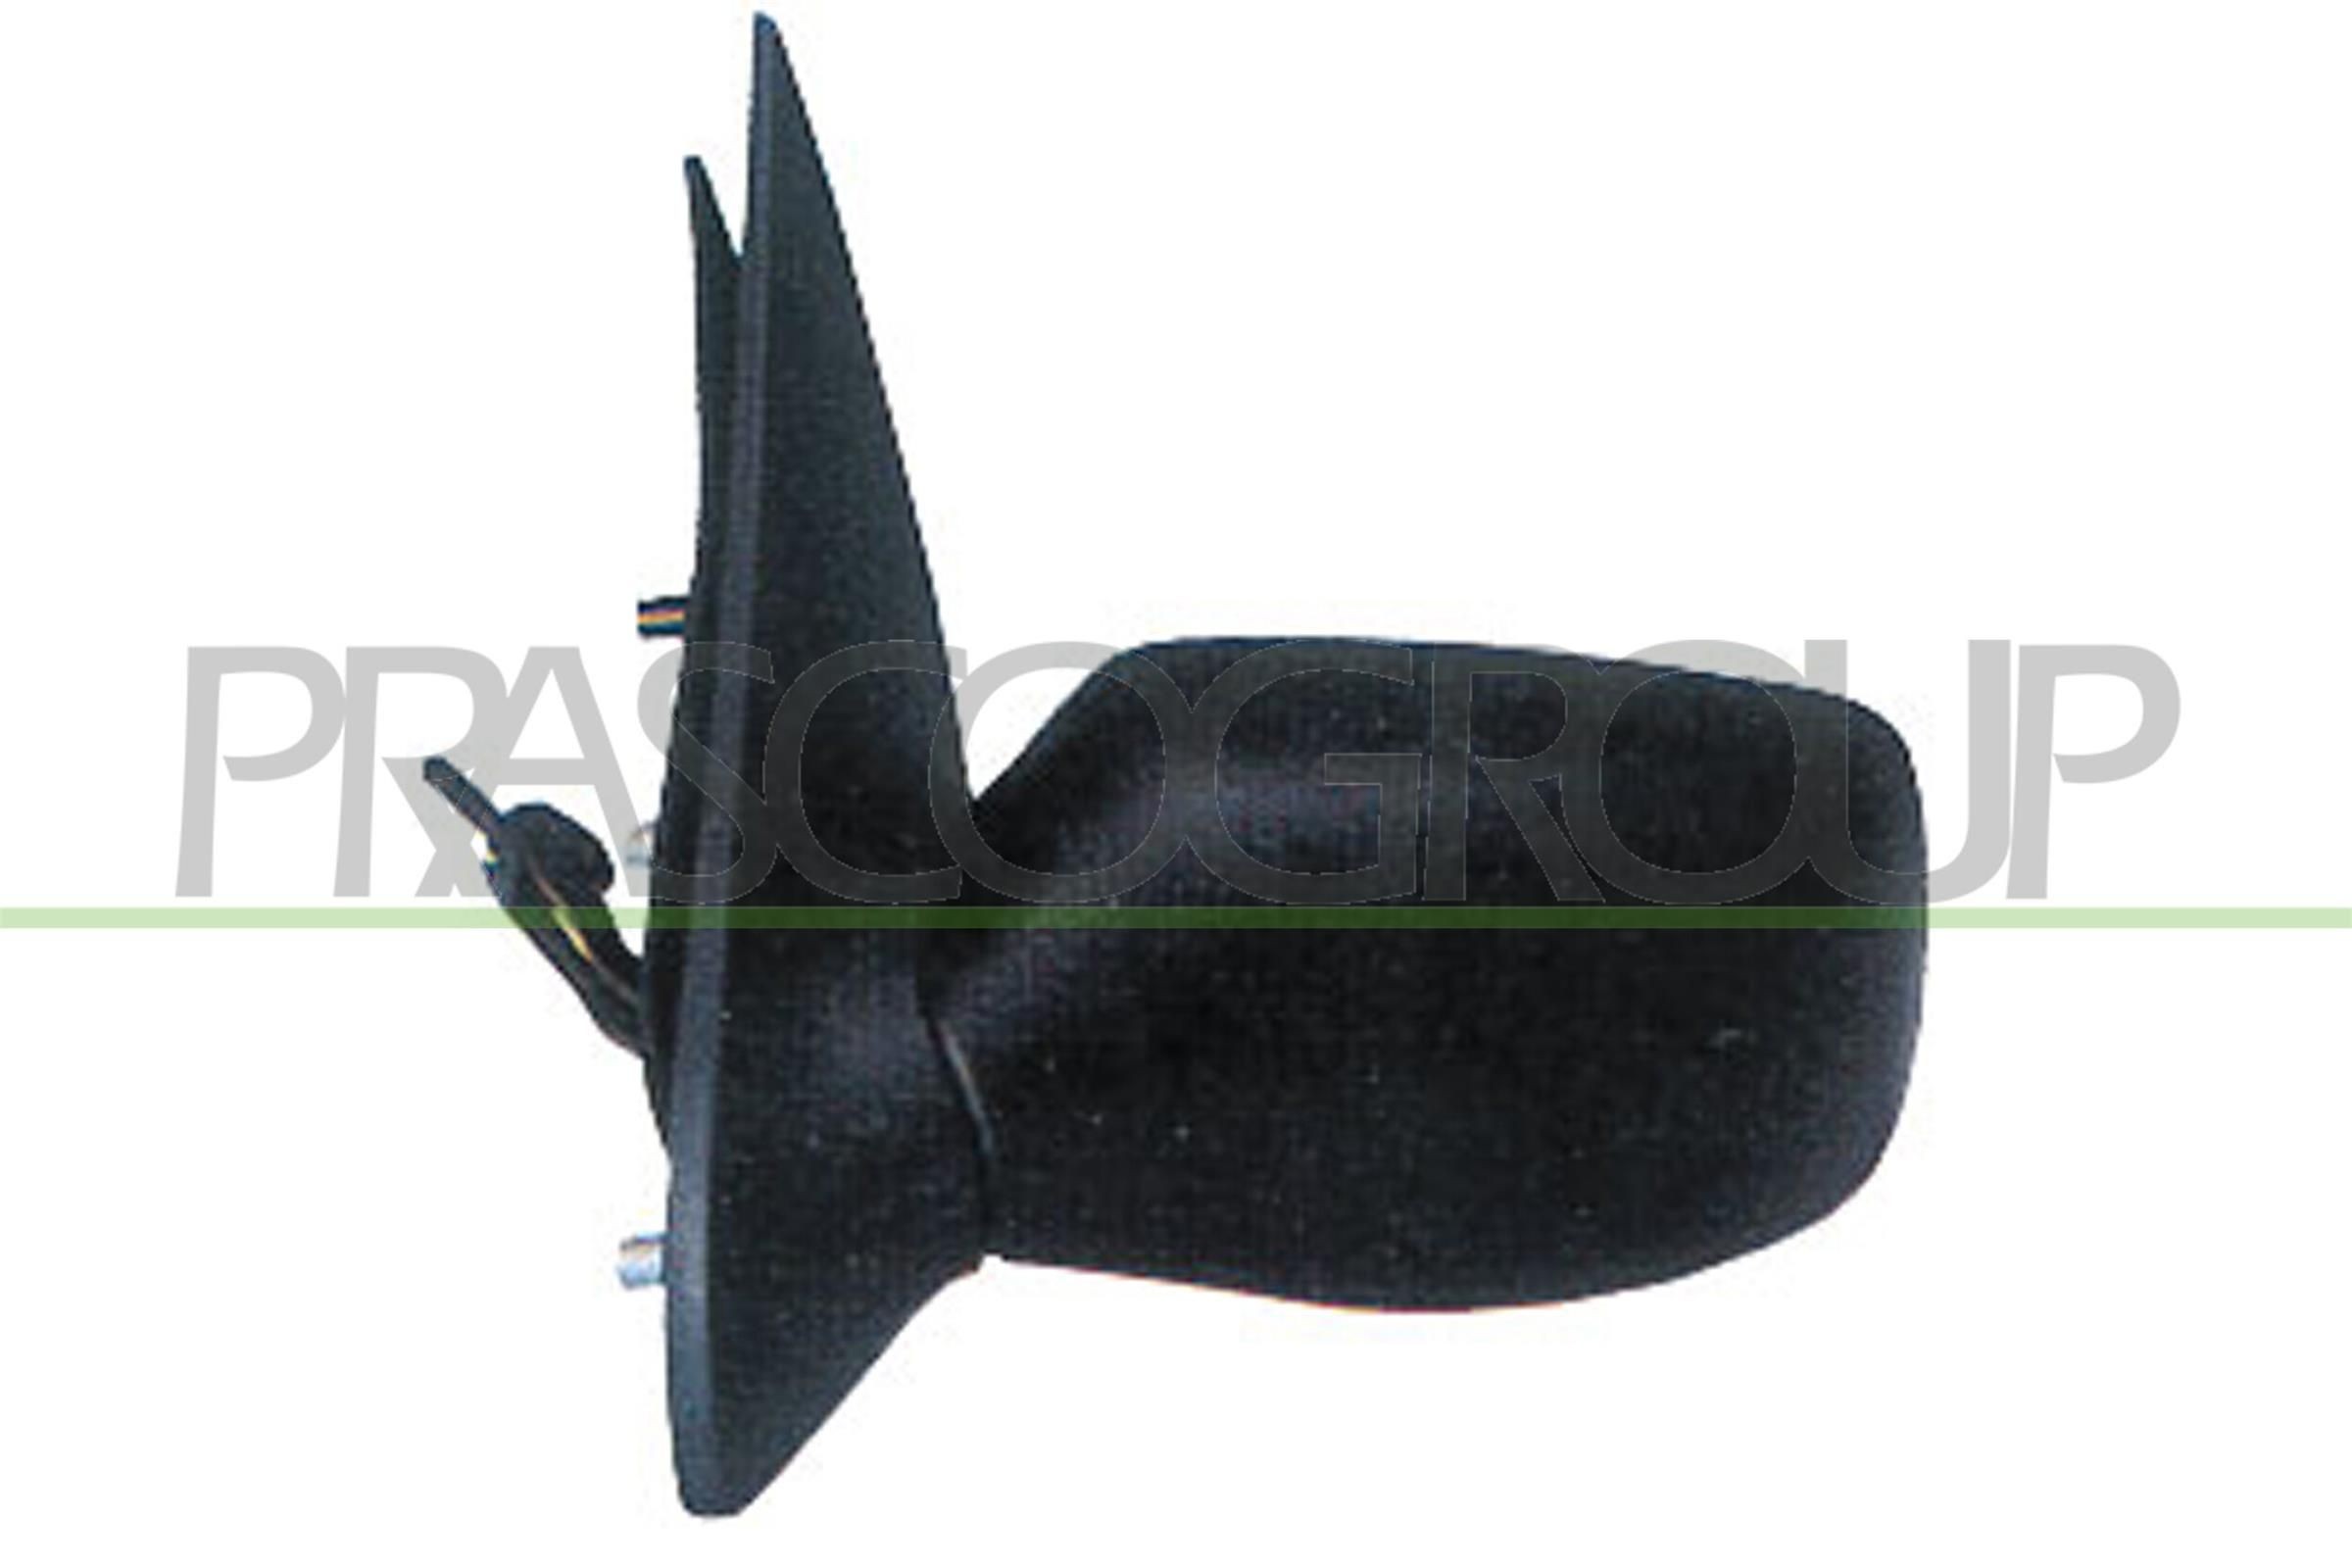 original FORD Escort Mk6 Hatchback (GAL, AAL, ABL) Wing mirror right and left PRASCO FD0287114